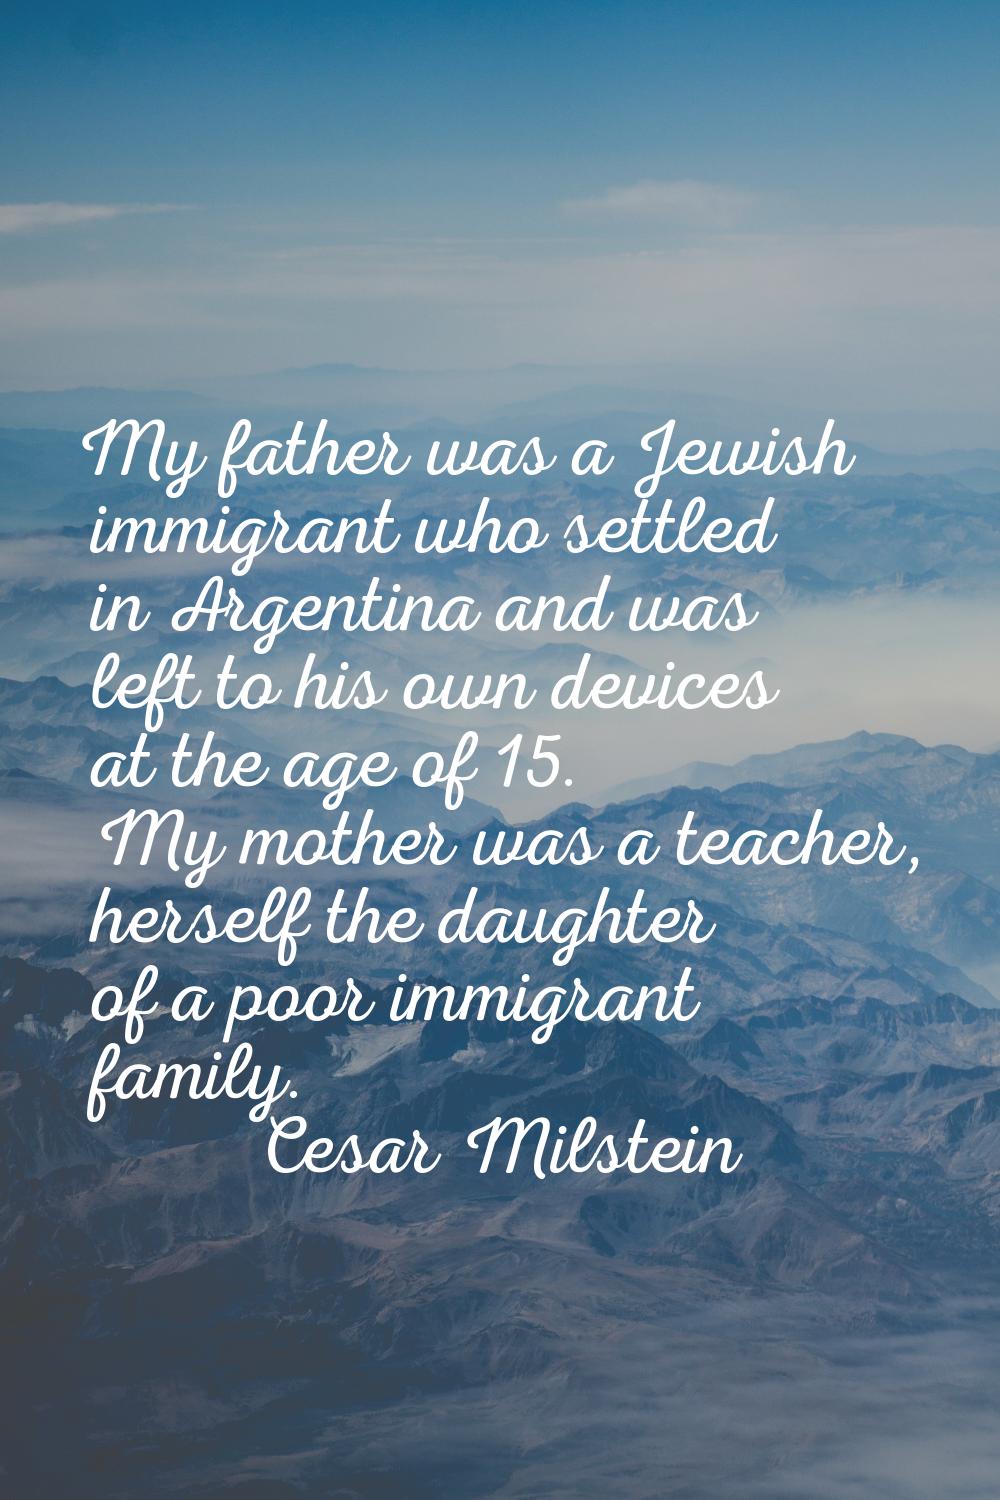 My father was a Jewish immigrant who settled in Argentina and was left to his own devices at the ag